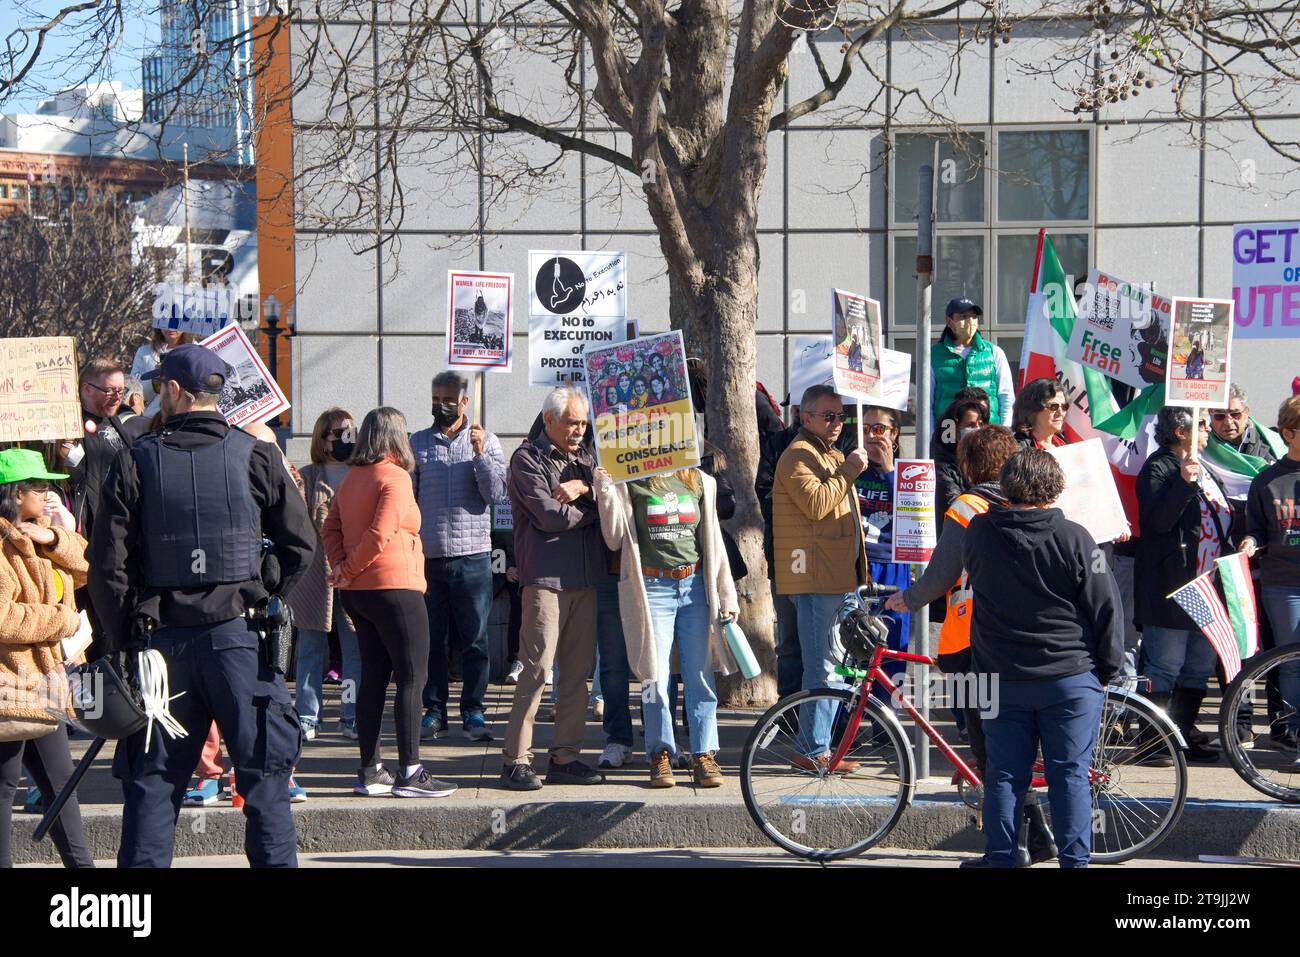 San Francisco, CA - Jan 21, 2023: Unidentified pro-choice counter protestors at the annual March for Life, holding pro-choice signs and banners across Stock Photo